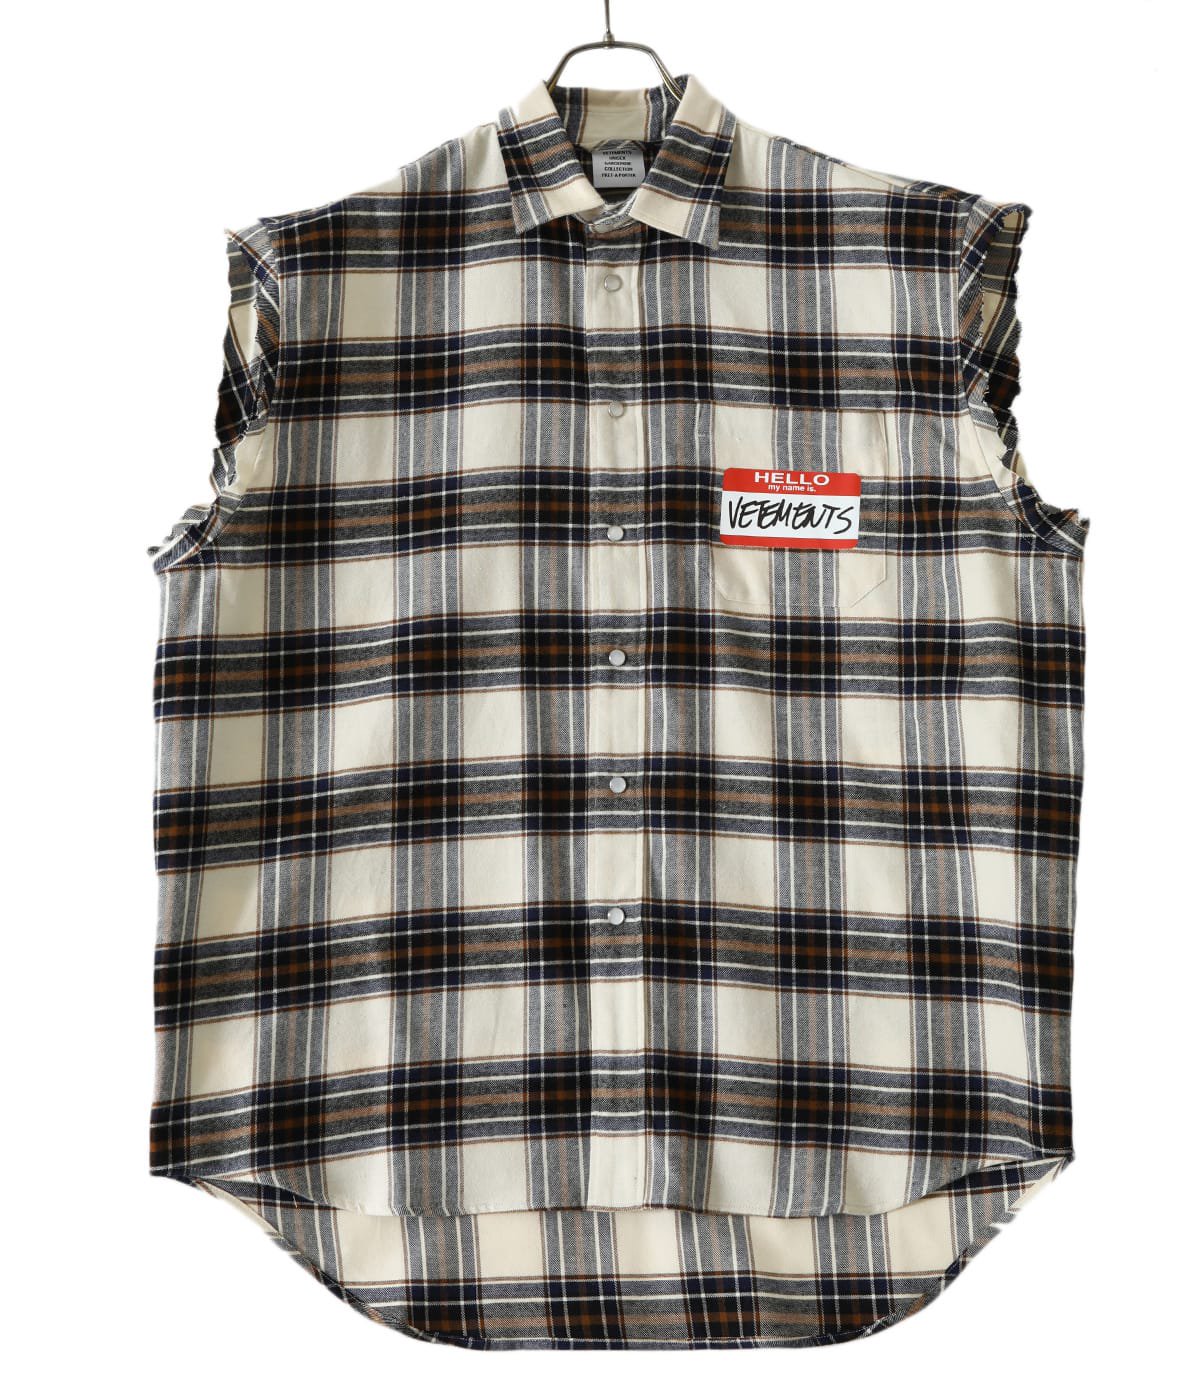 MY NAME IS VETEMENTS SLEEVELESS FLANNEL SHIRT